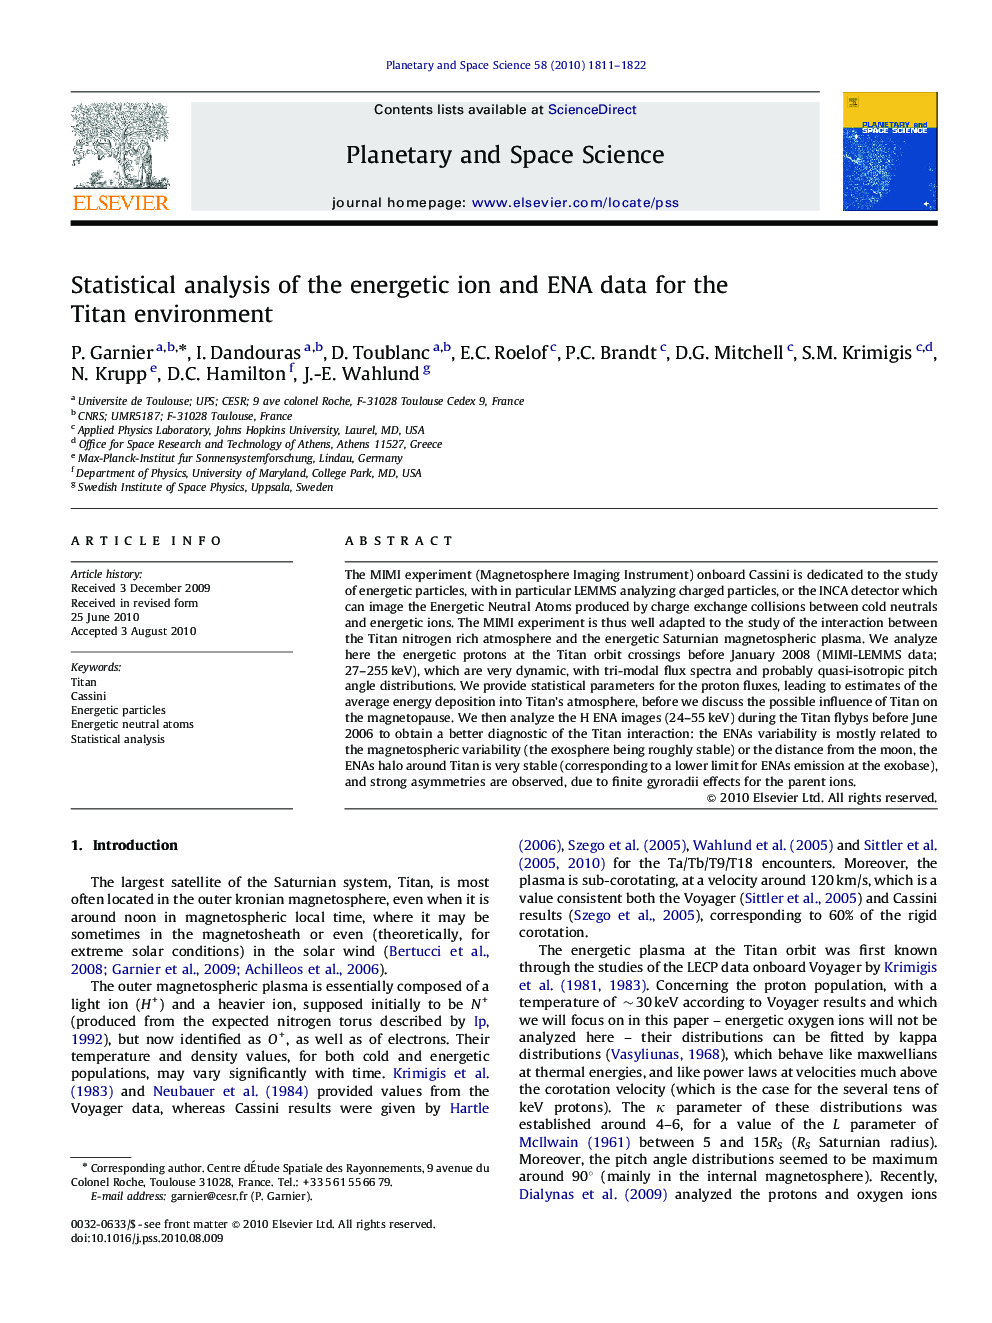 Statistical analysis of the energetic ion and ENA data for the Titan environment